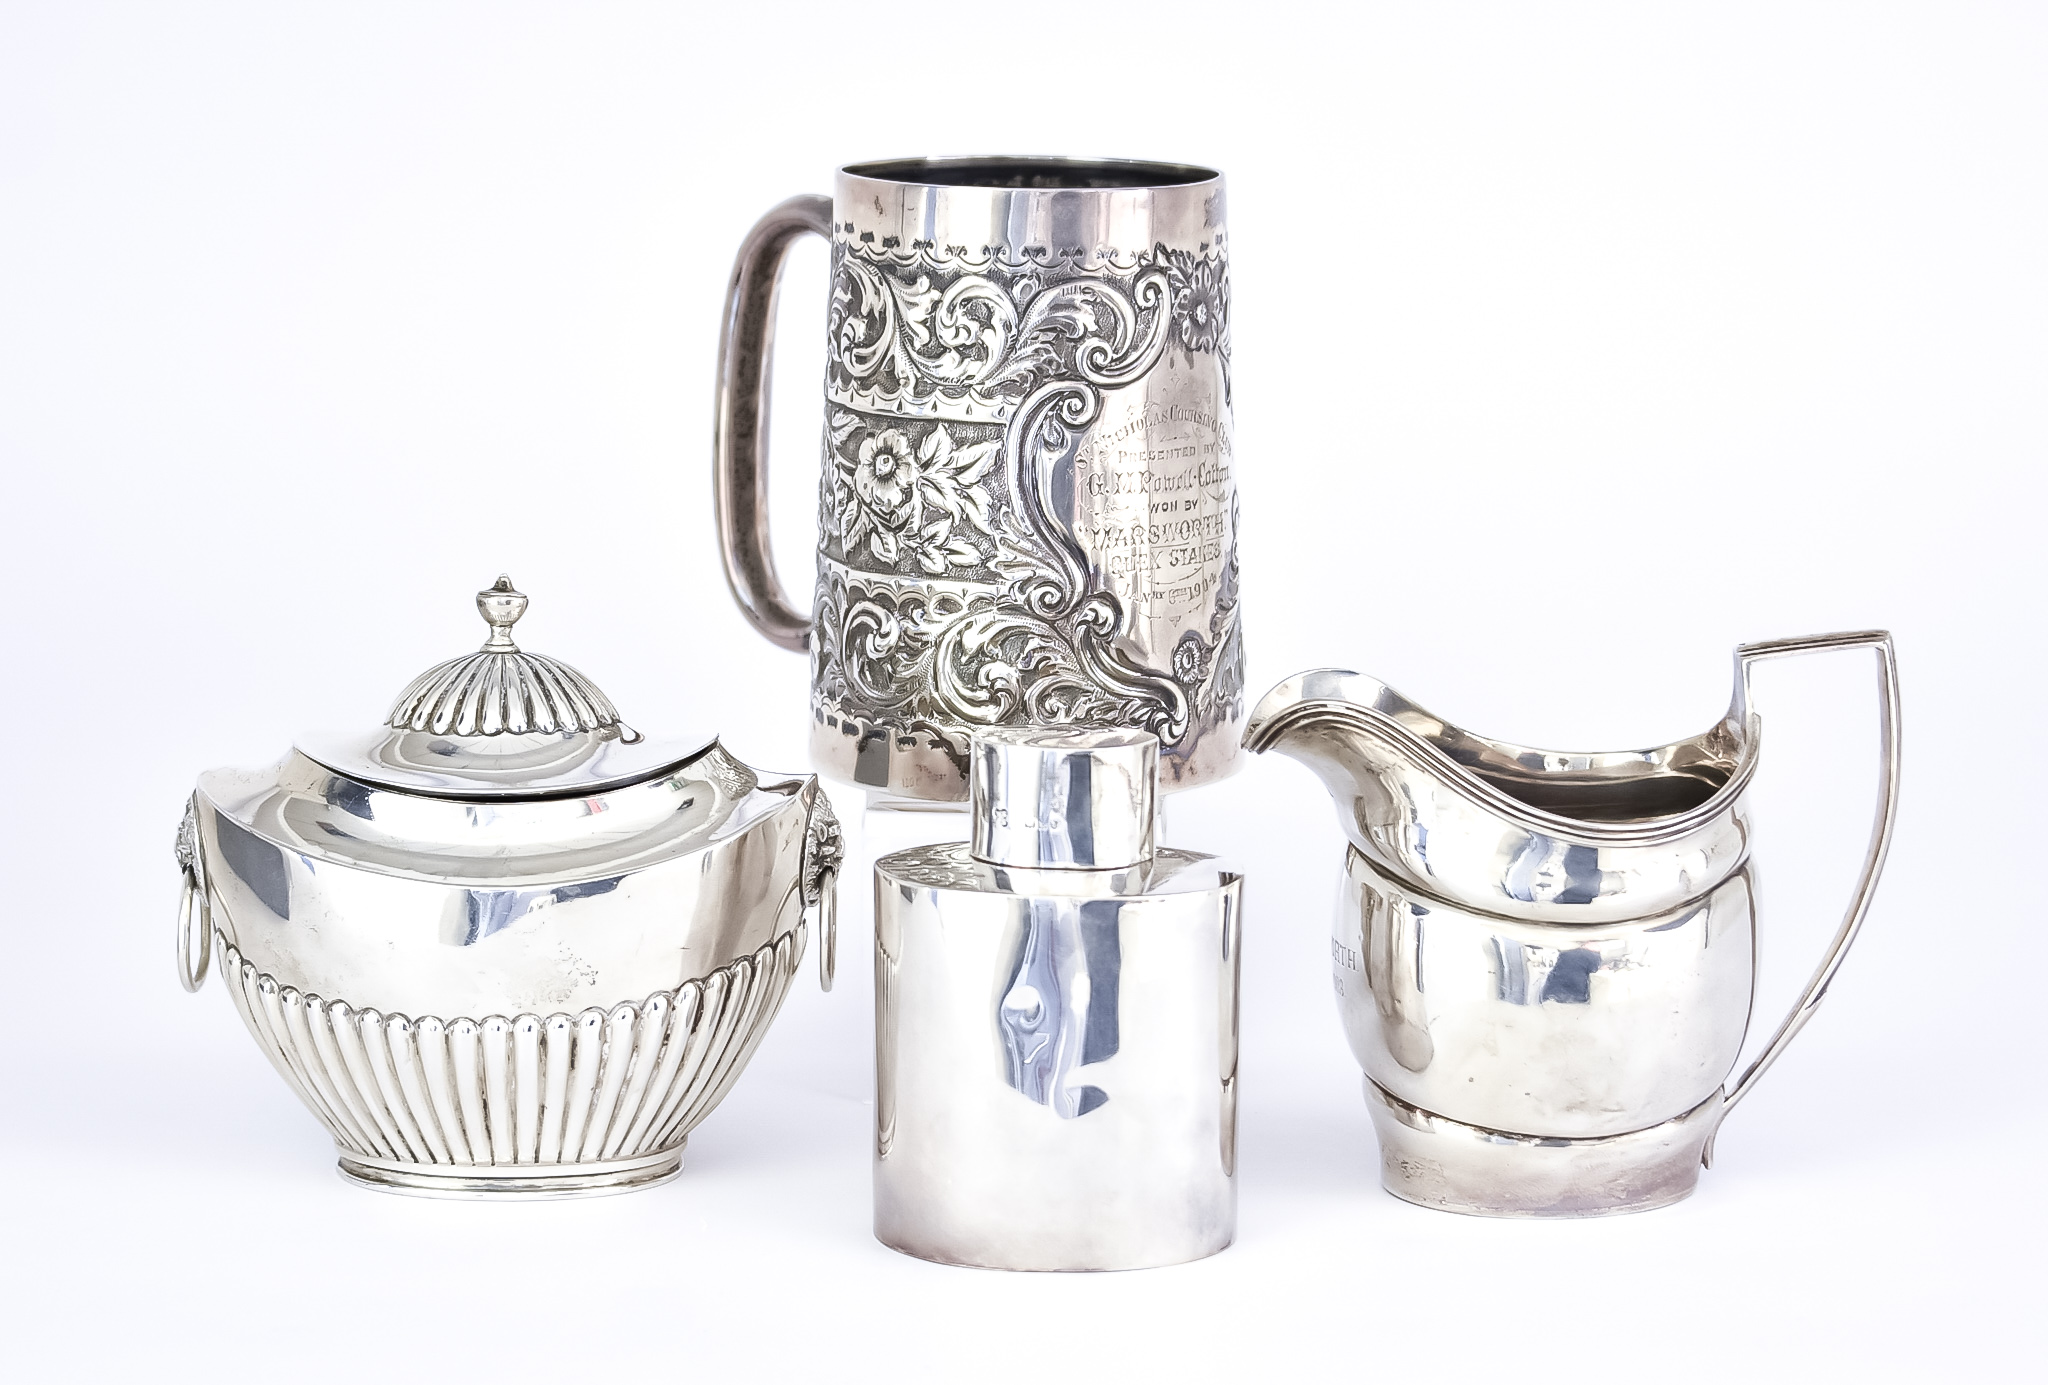 A Late Victorian Silver Embossed Tankard by William Henry Leather, Birmingham 1899, with shaped